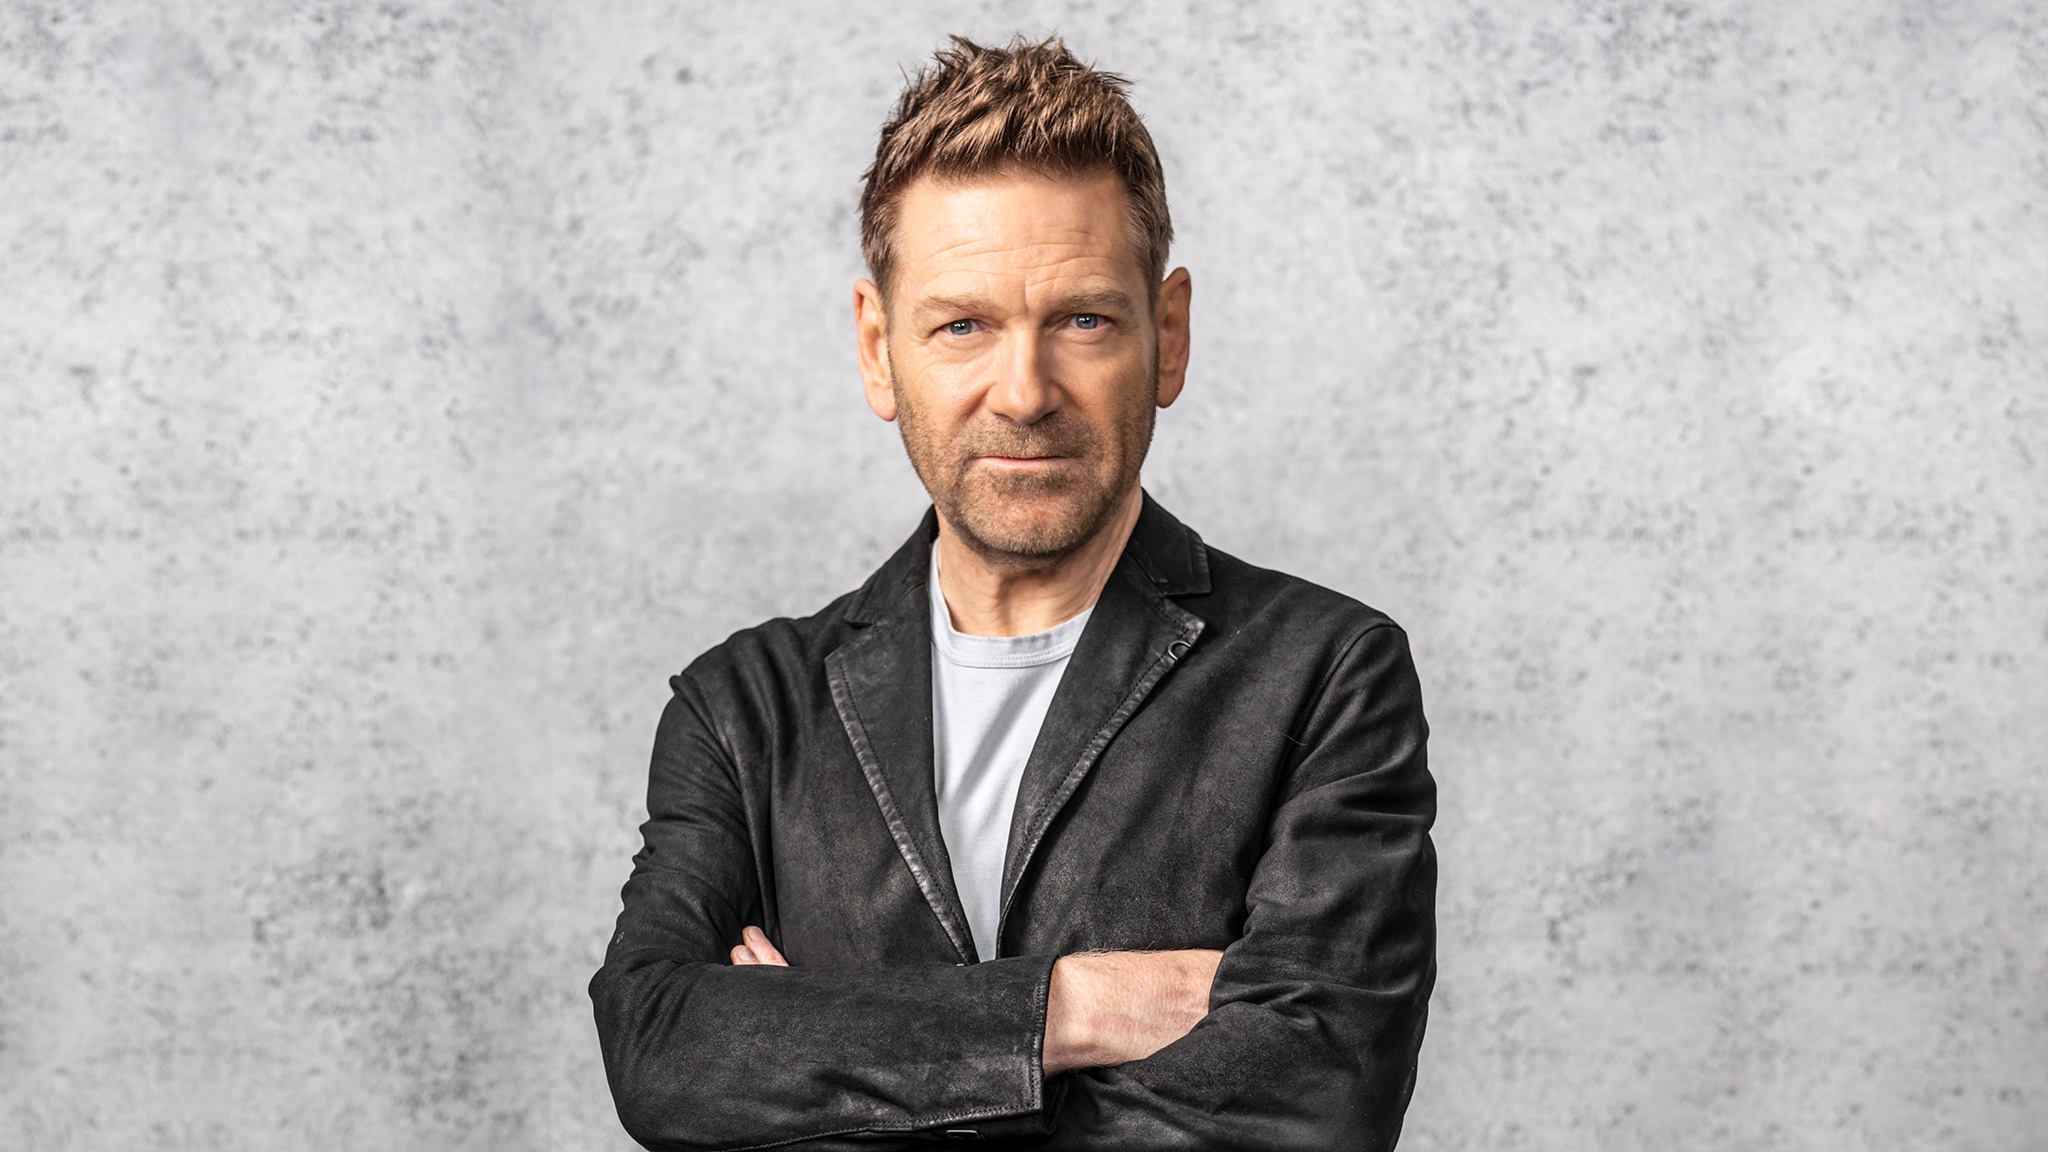 Kenneth Branagh, a white male with brown hair, stands center frame facing forward with his arms crossed. He stands in front of a blurred gray background, in an open black waxed leather blazer and light gray shirt.